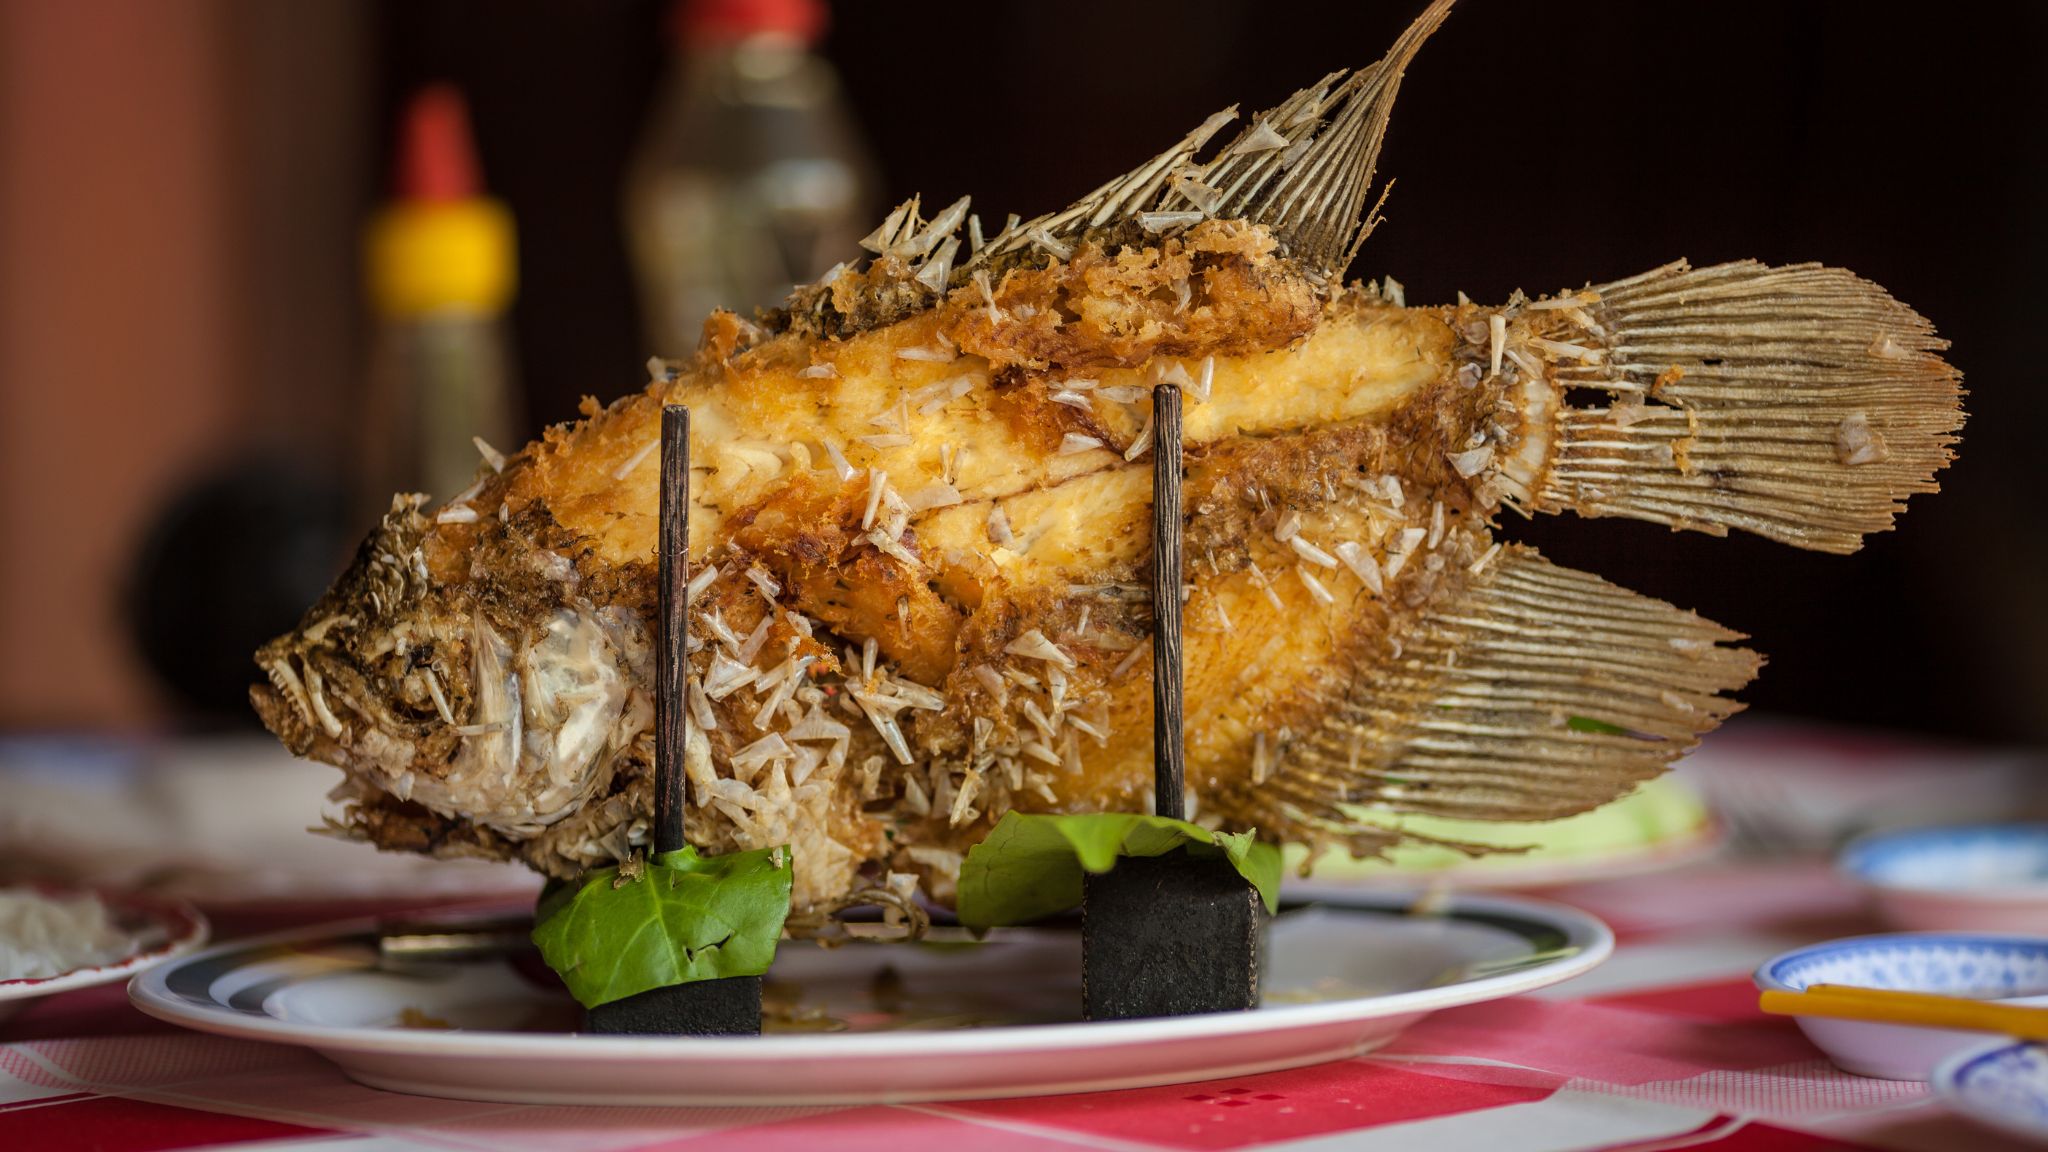 Day 12 Elephant Ear Fish One Of The Mekong Region's Most Popular Dish